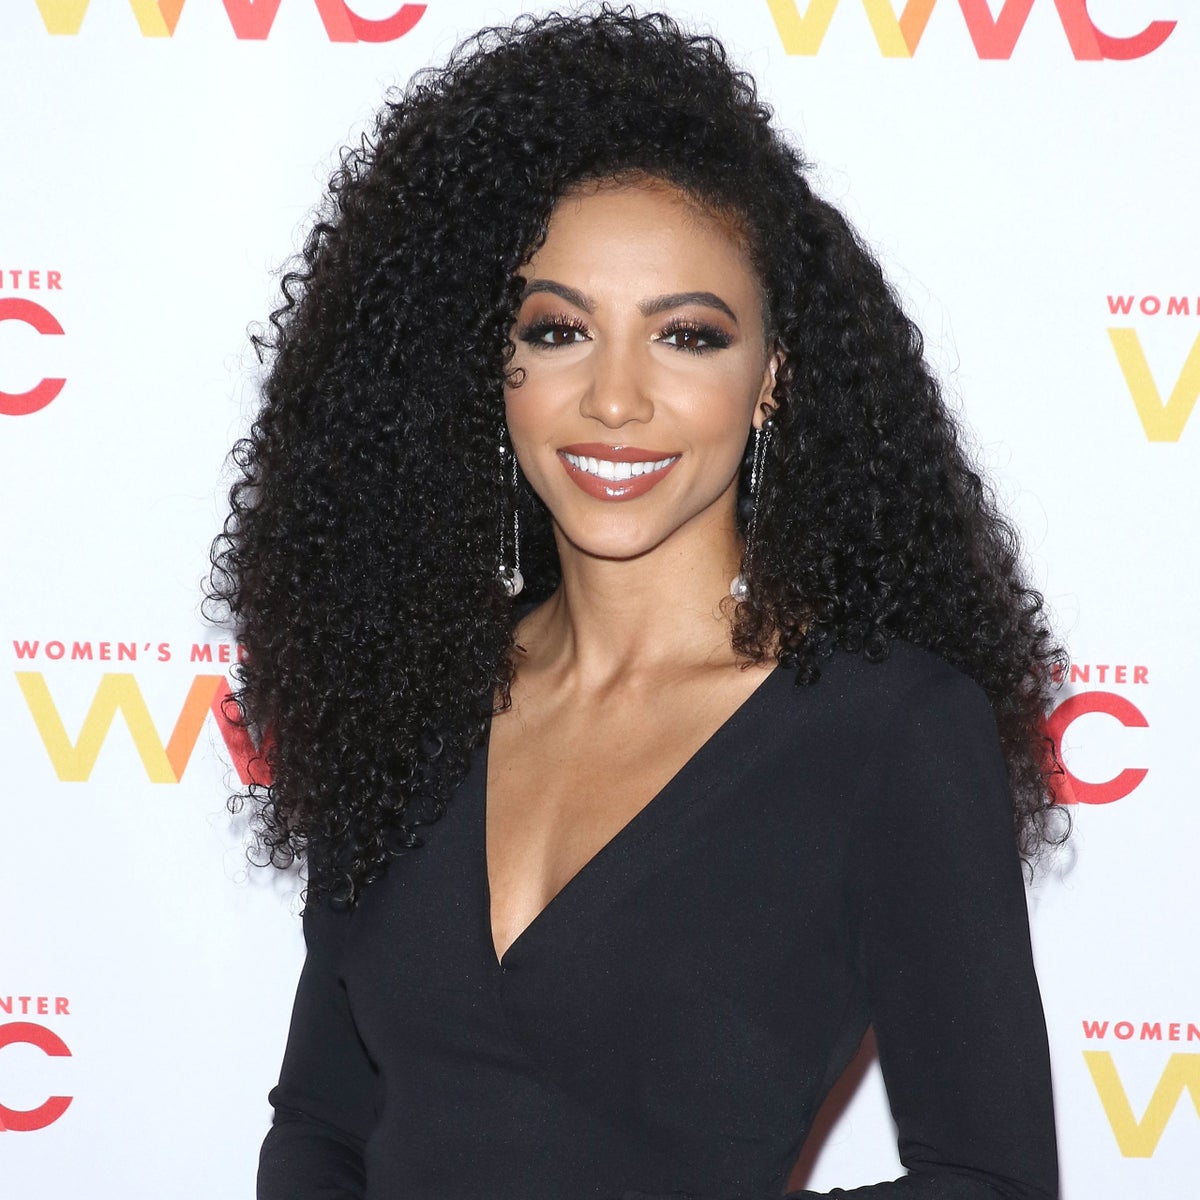 Former Miss USA Cheslie Kryst's Book Will Be Published This Year With